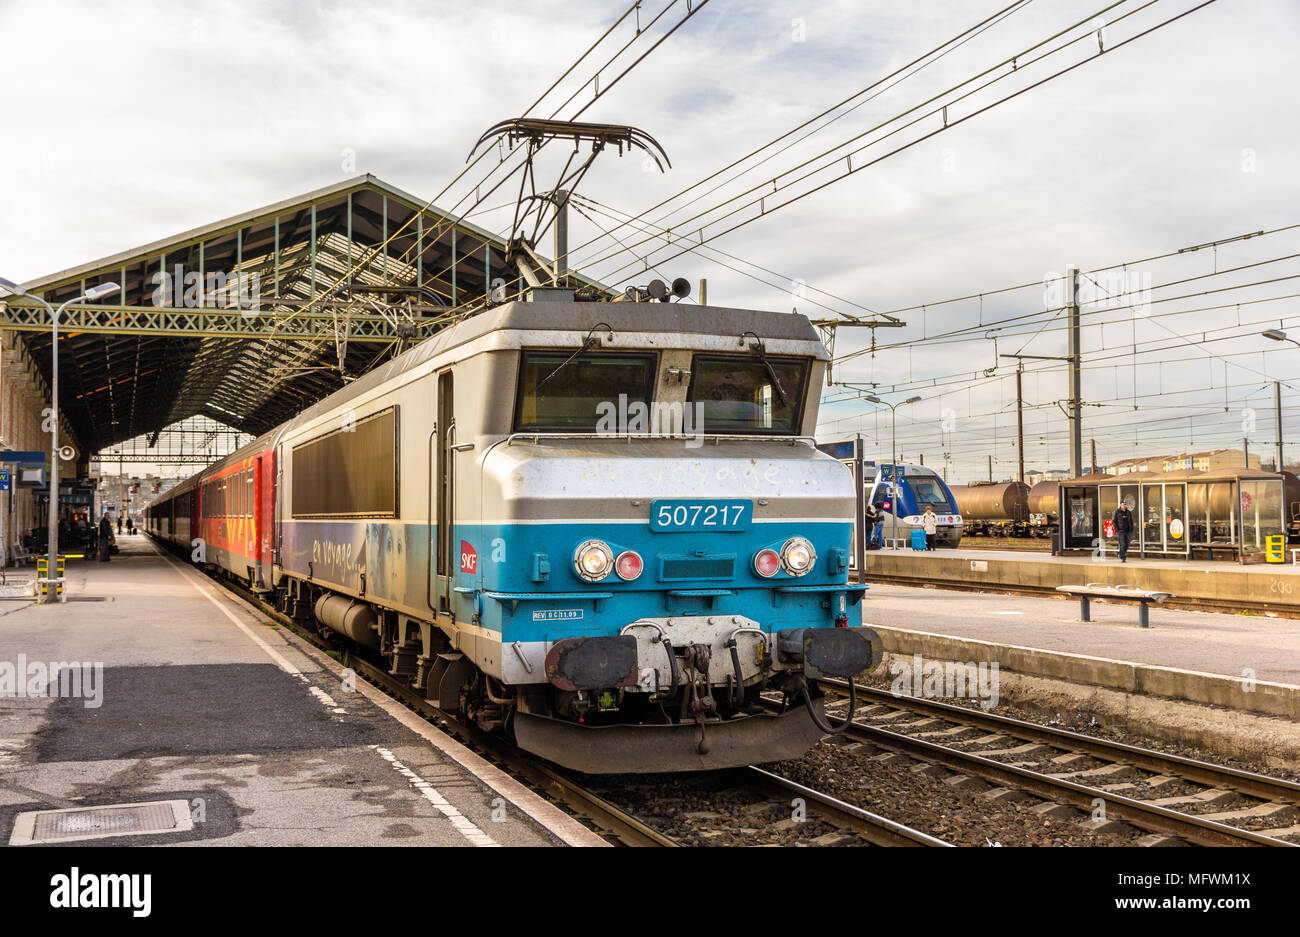 NARBONNE, FRANCE - JANUARY 06: Passenger train hauled by electri Stock Photo